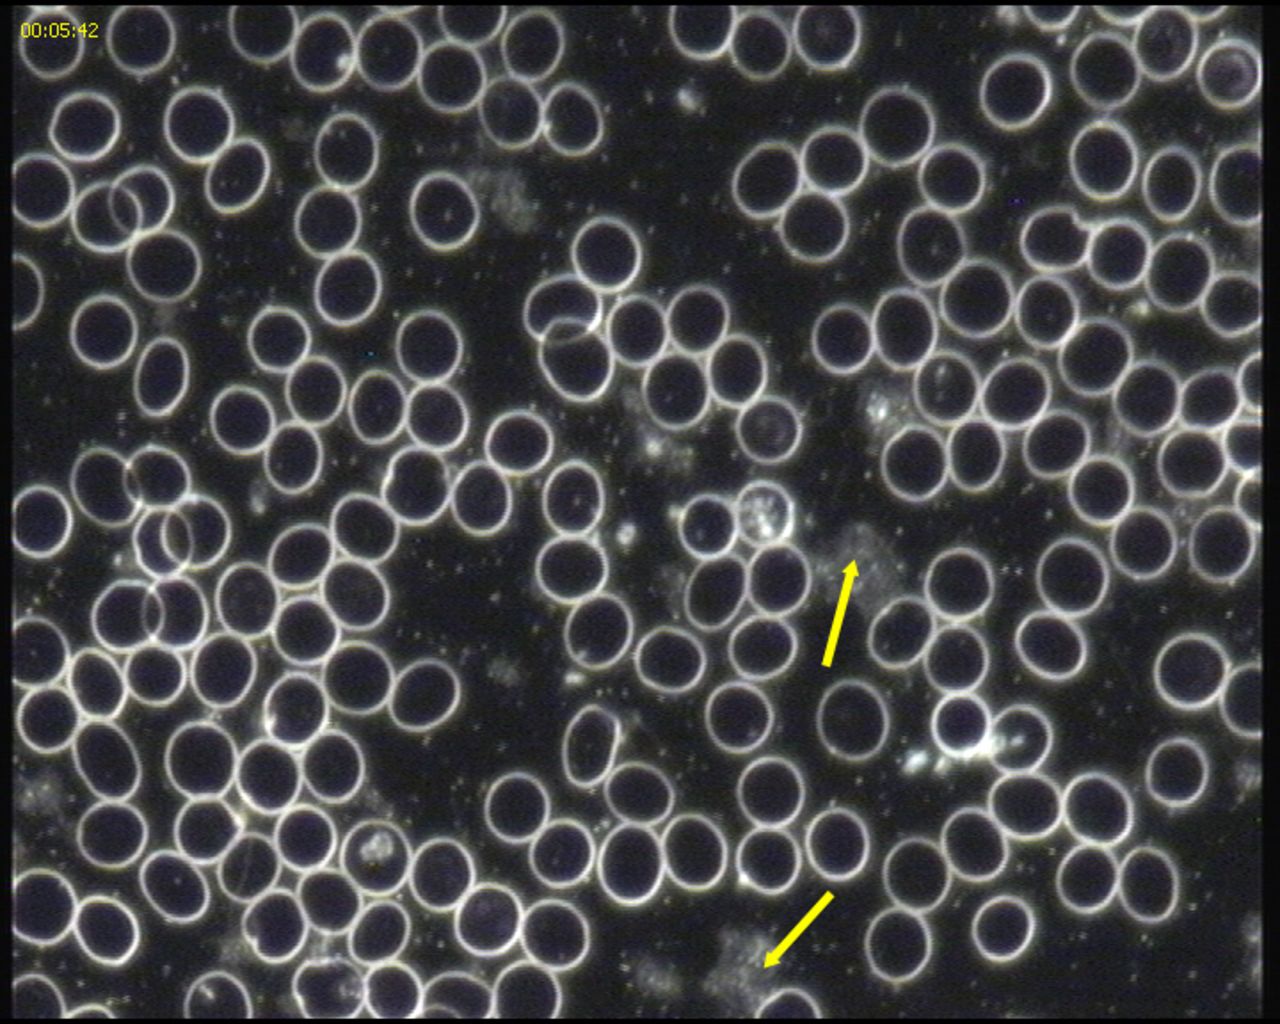 This image, taken after the subject went on a gluten-free diet, shows the blood cells are able to flow more freely -- allowing better transportation of oxygen around the body.